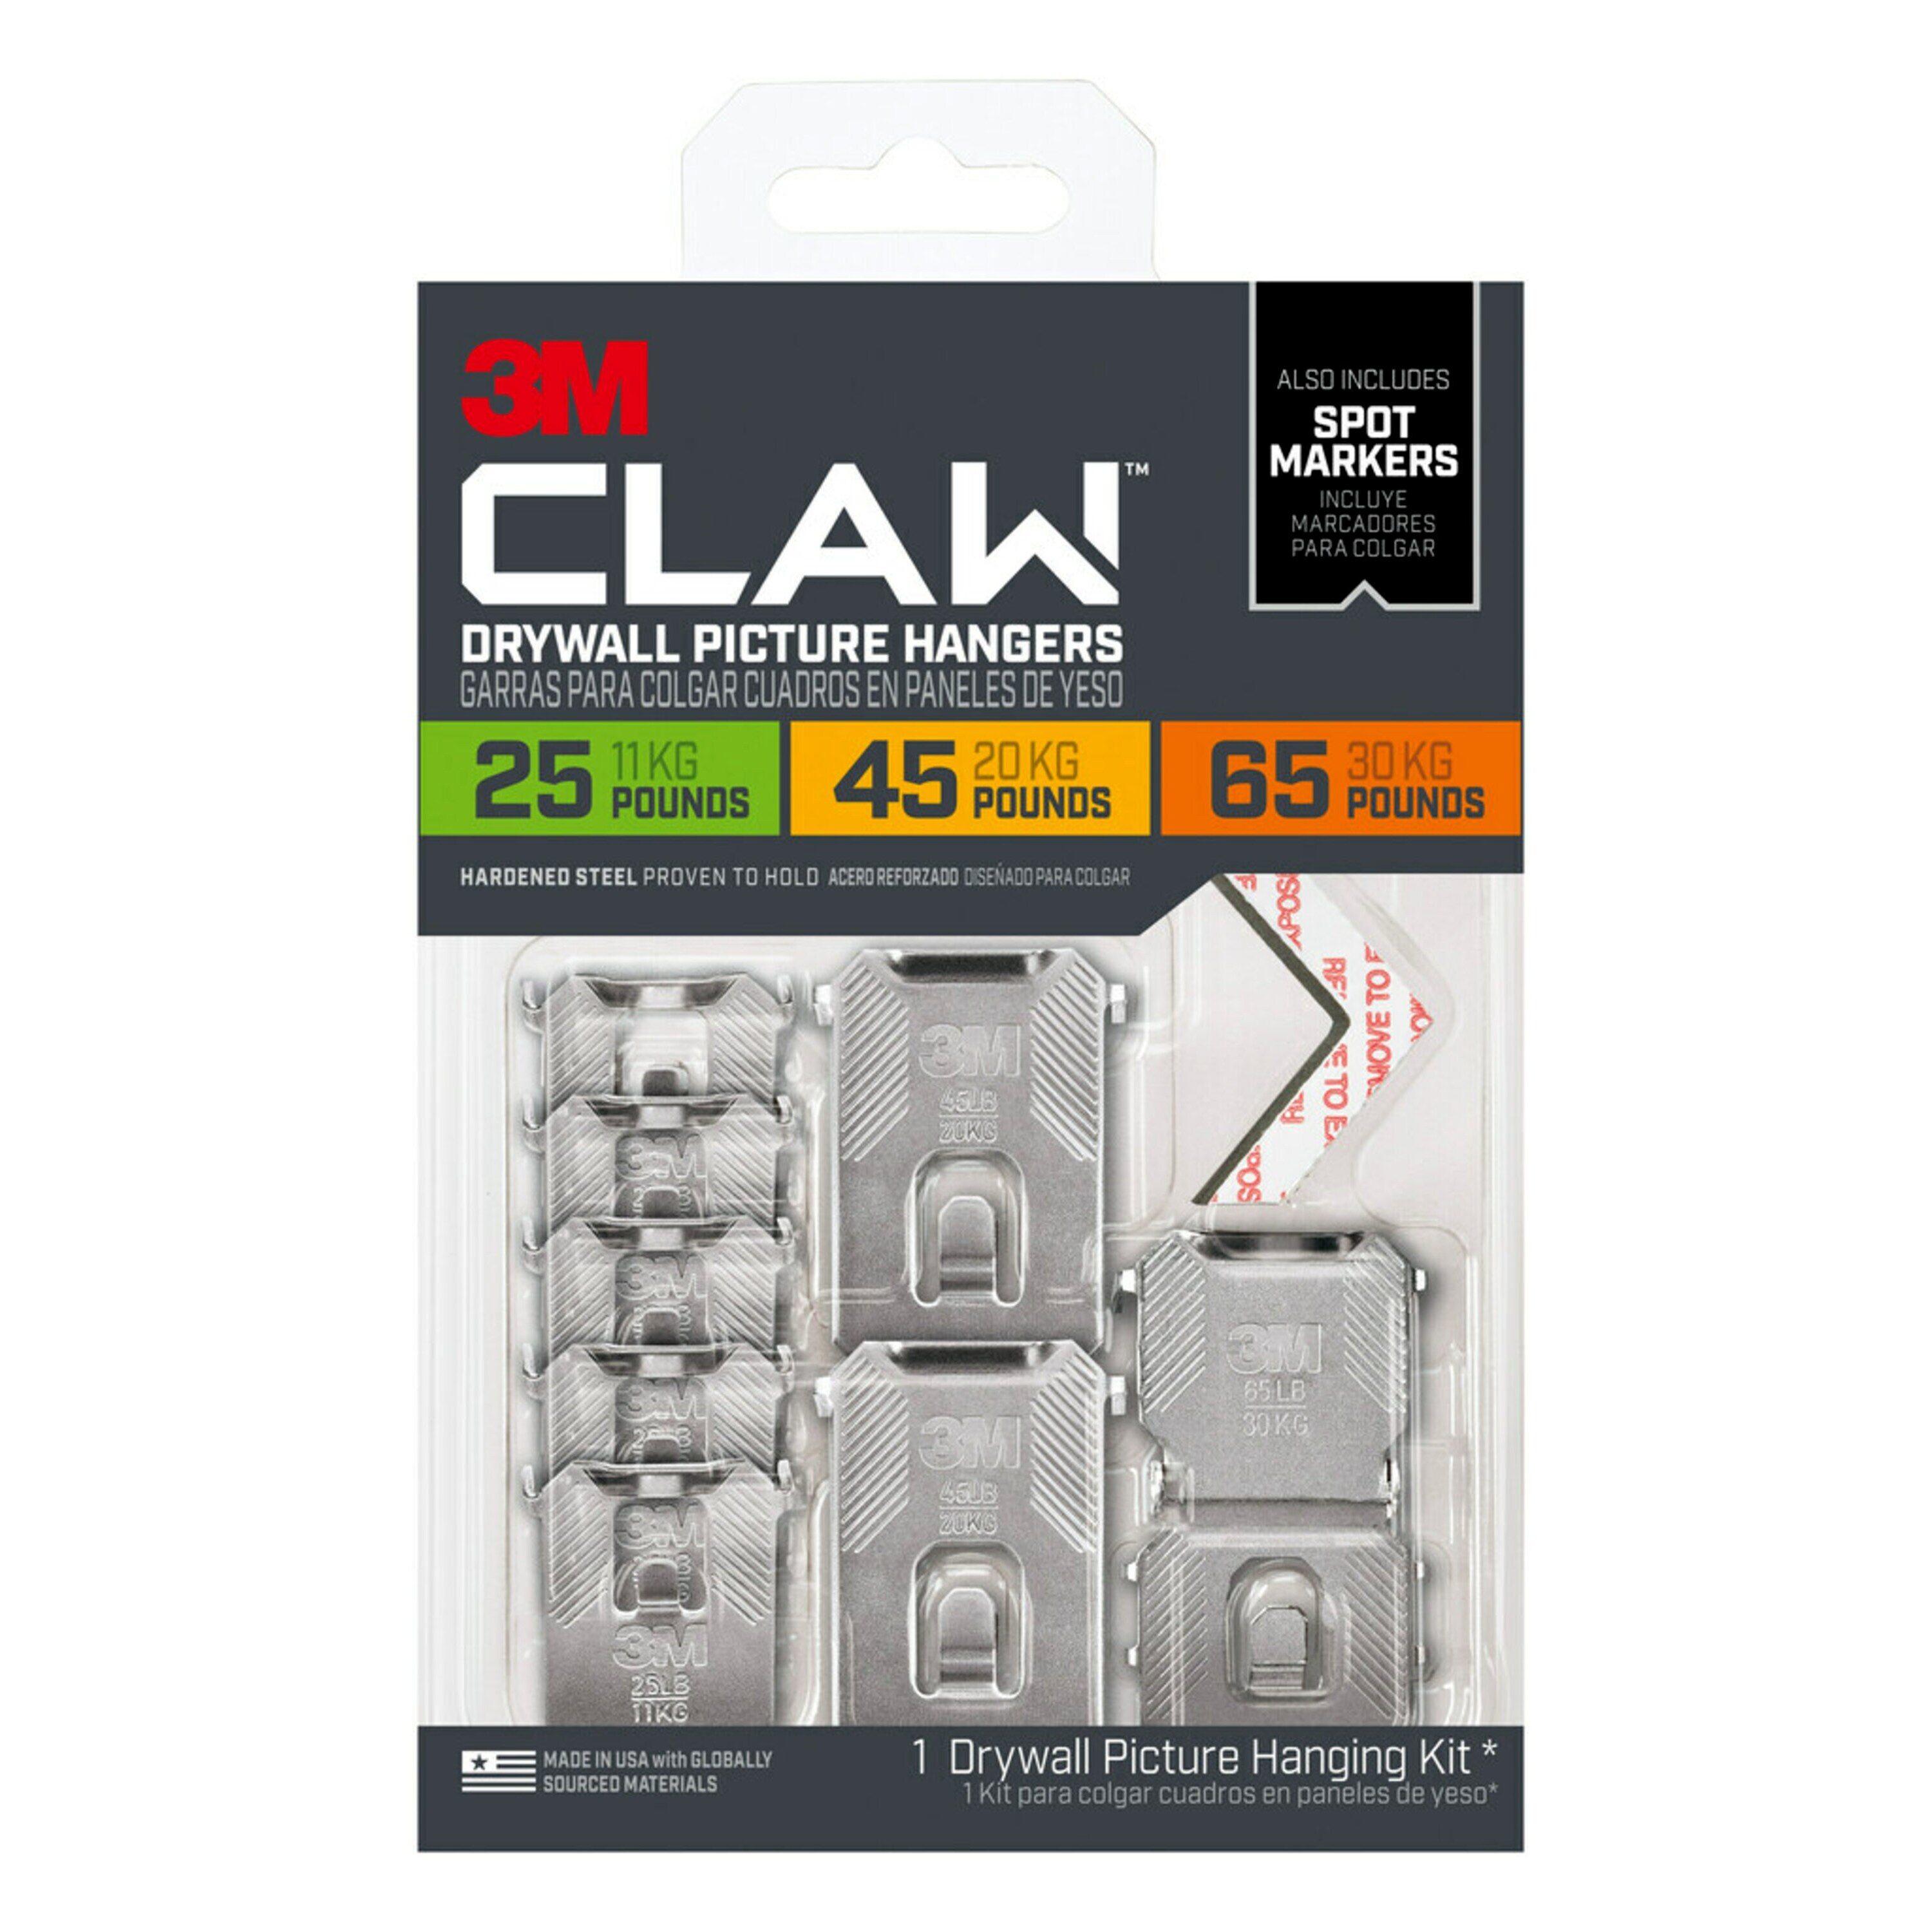 3M 3m Claw Drywall Picture Hangers 45lb with Temporary Spot